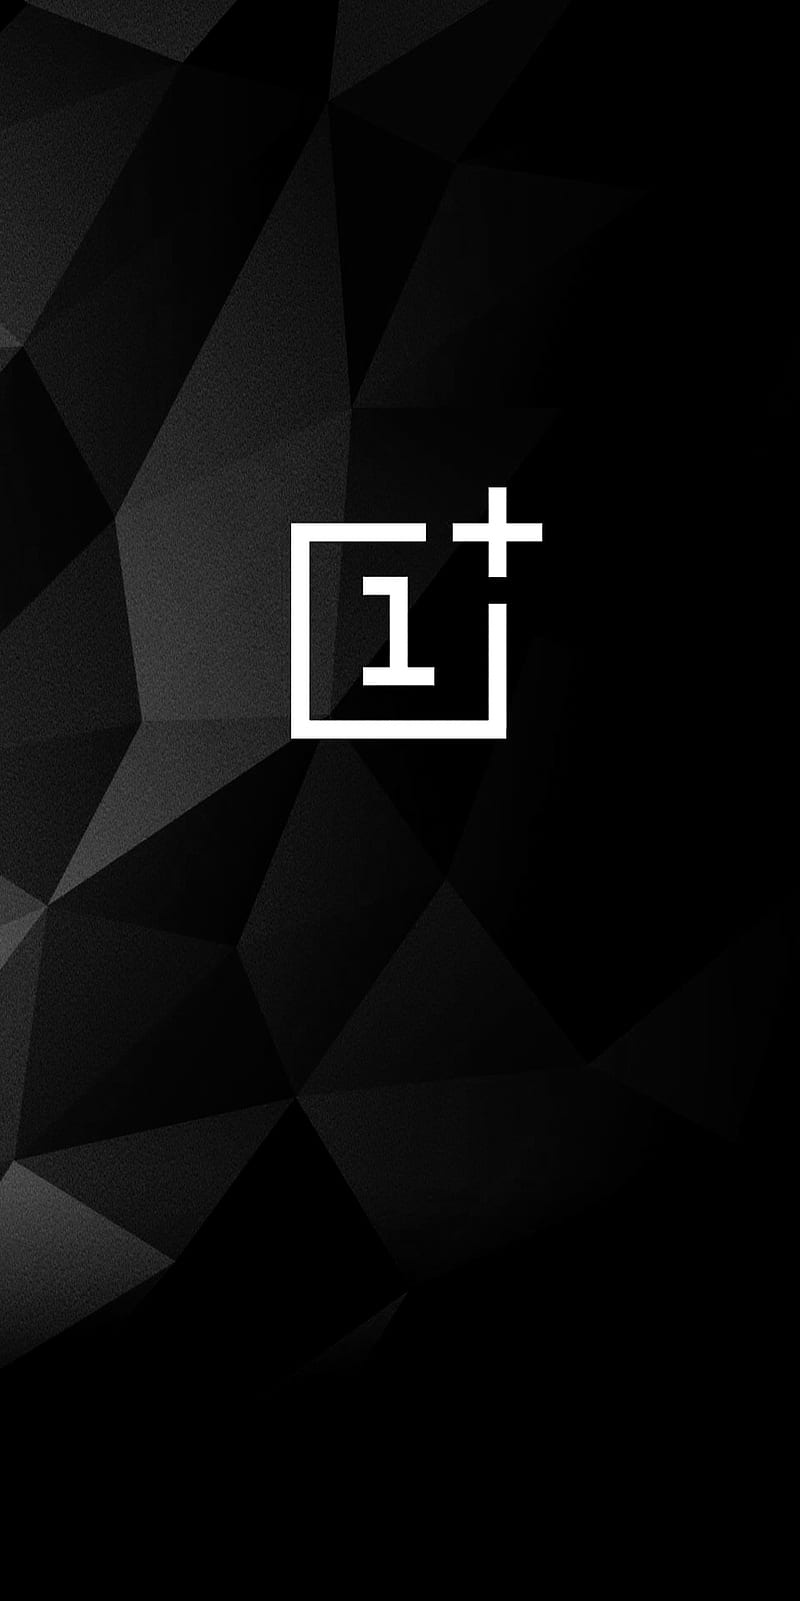 🔥 Download Wallpaper Oneplus Forums by @kathrynj14 | OnePlus Logo  Wallpapers, Love Logo Wallpapers, Volcom Logo Wallpaper, Nirvana Logo  Wallpaper